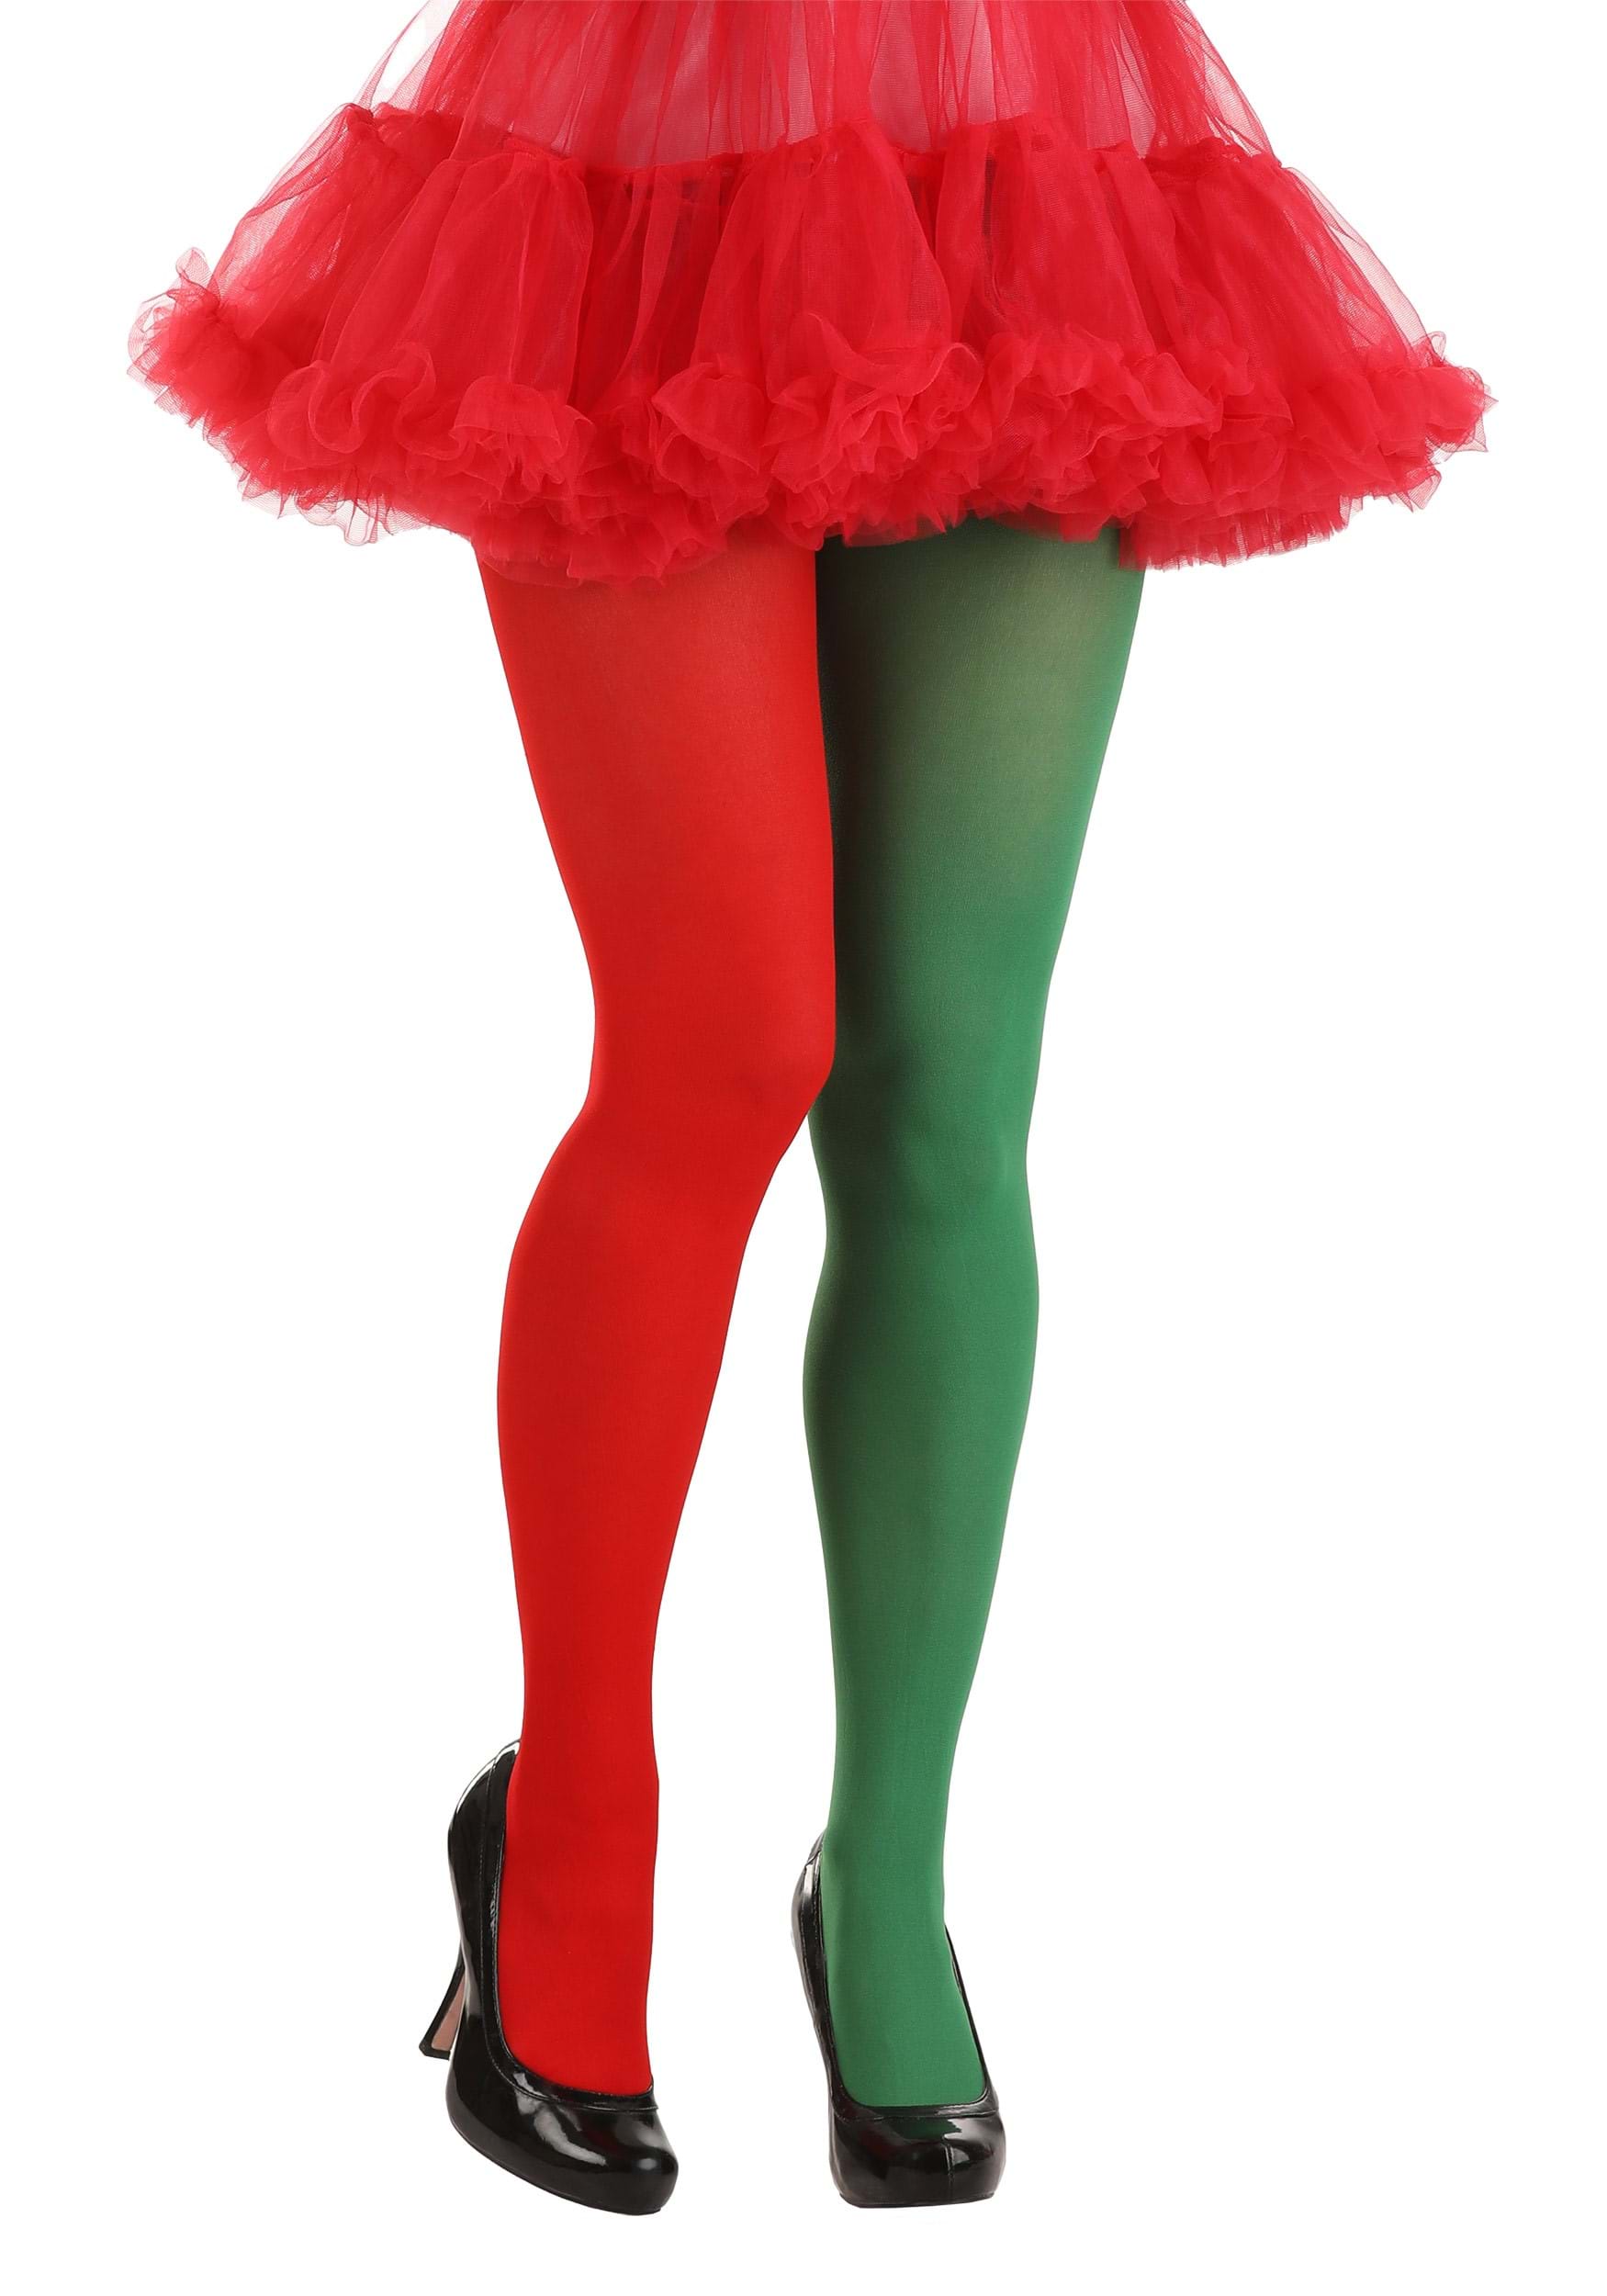 https://images.halloweencostumes.ca/products/82270/1-1/womens-red-and-green-tights.jpg